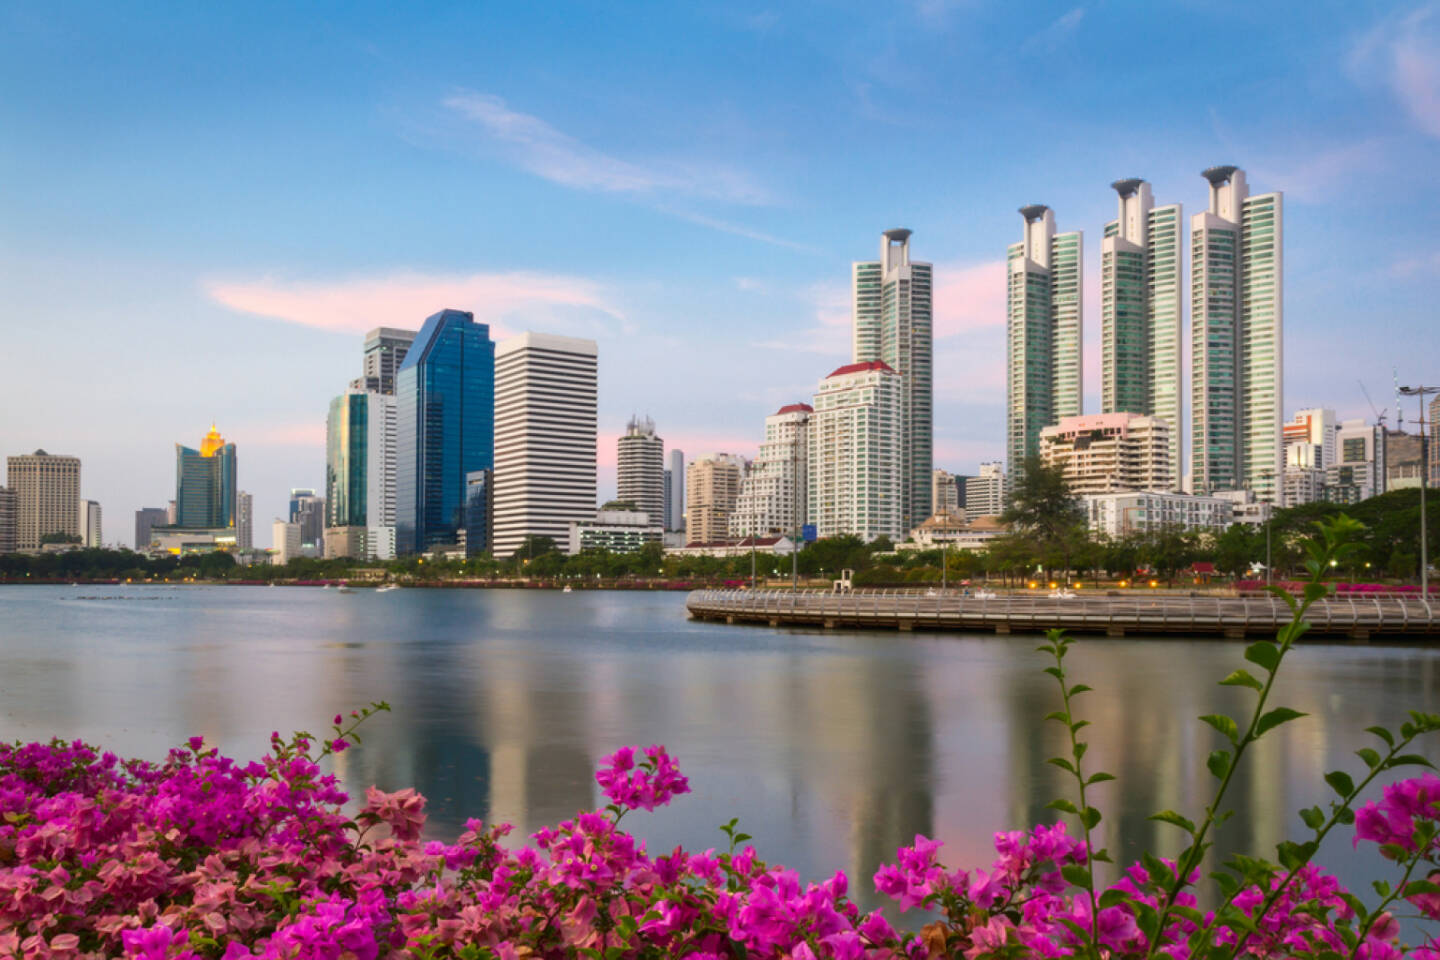 Bankok, Thailand, http://www.shutterstock.com/de/pic-194100380/stock-photo-bangkok-city-at-sunset-with-reflection-in-lake-and-flowers-on-the-foreground-bangkok-thailand.html 